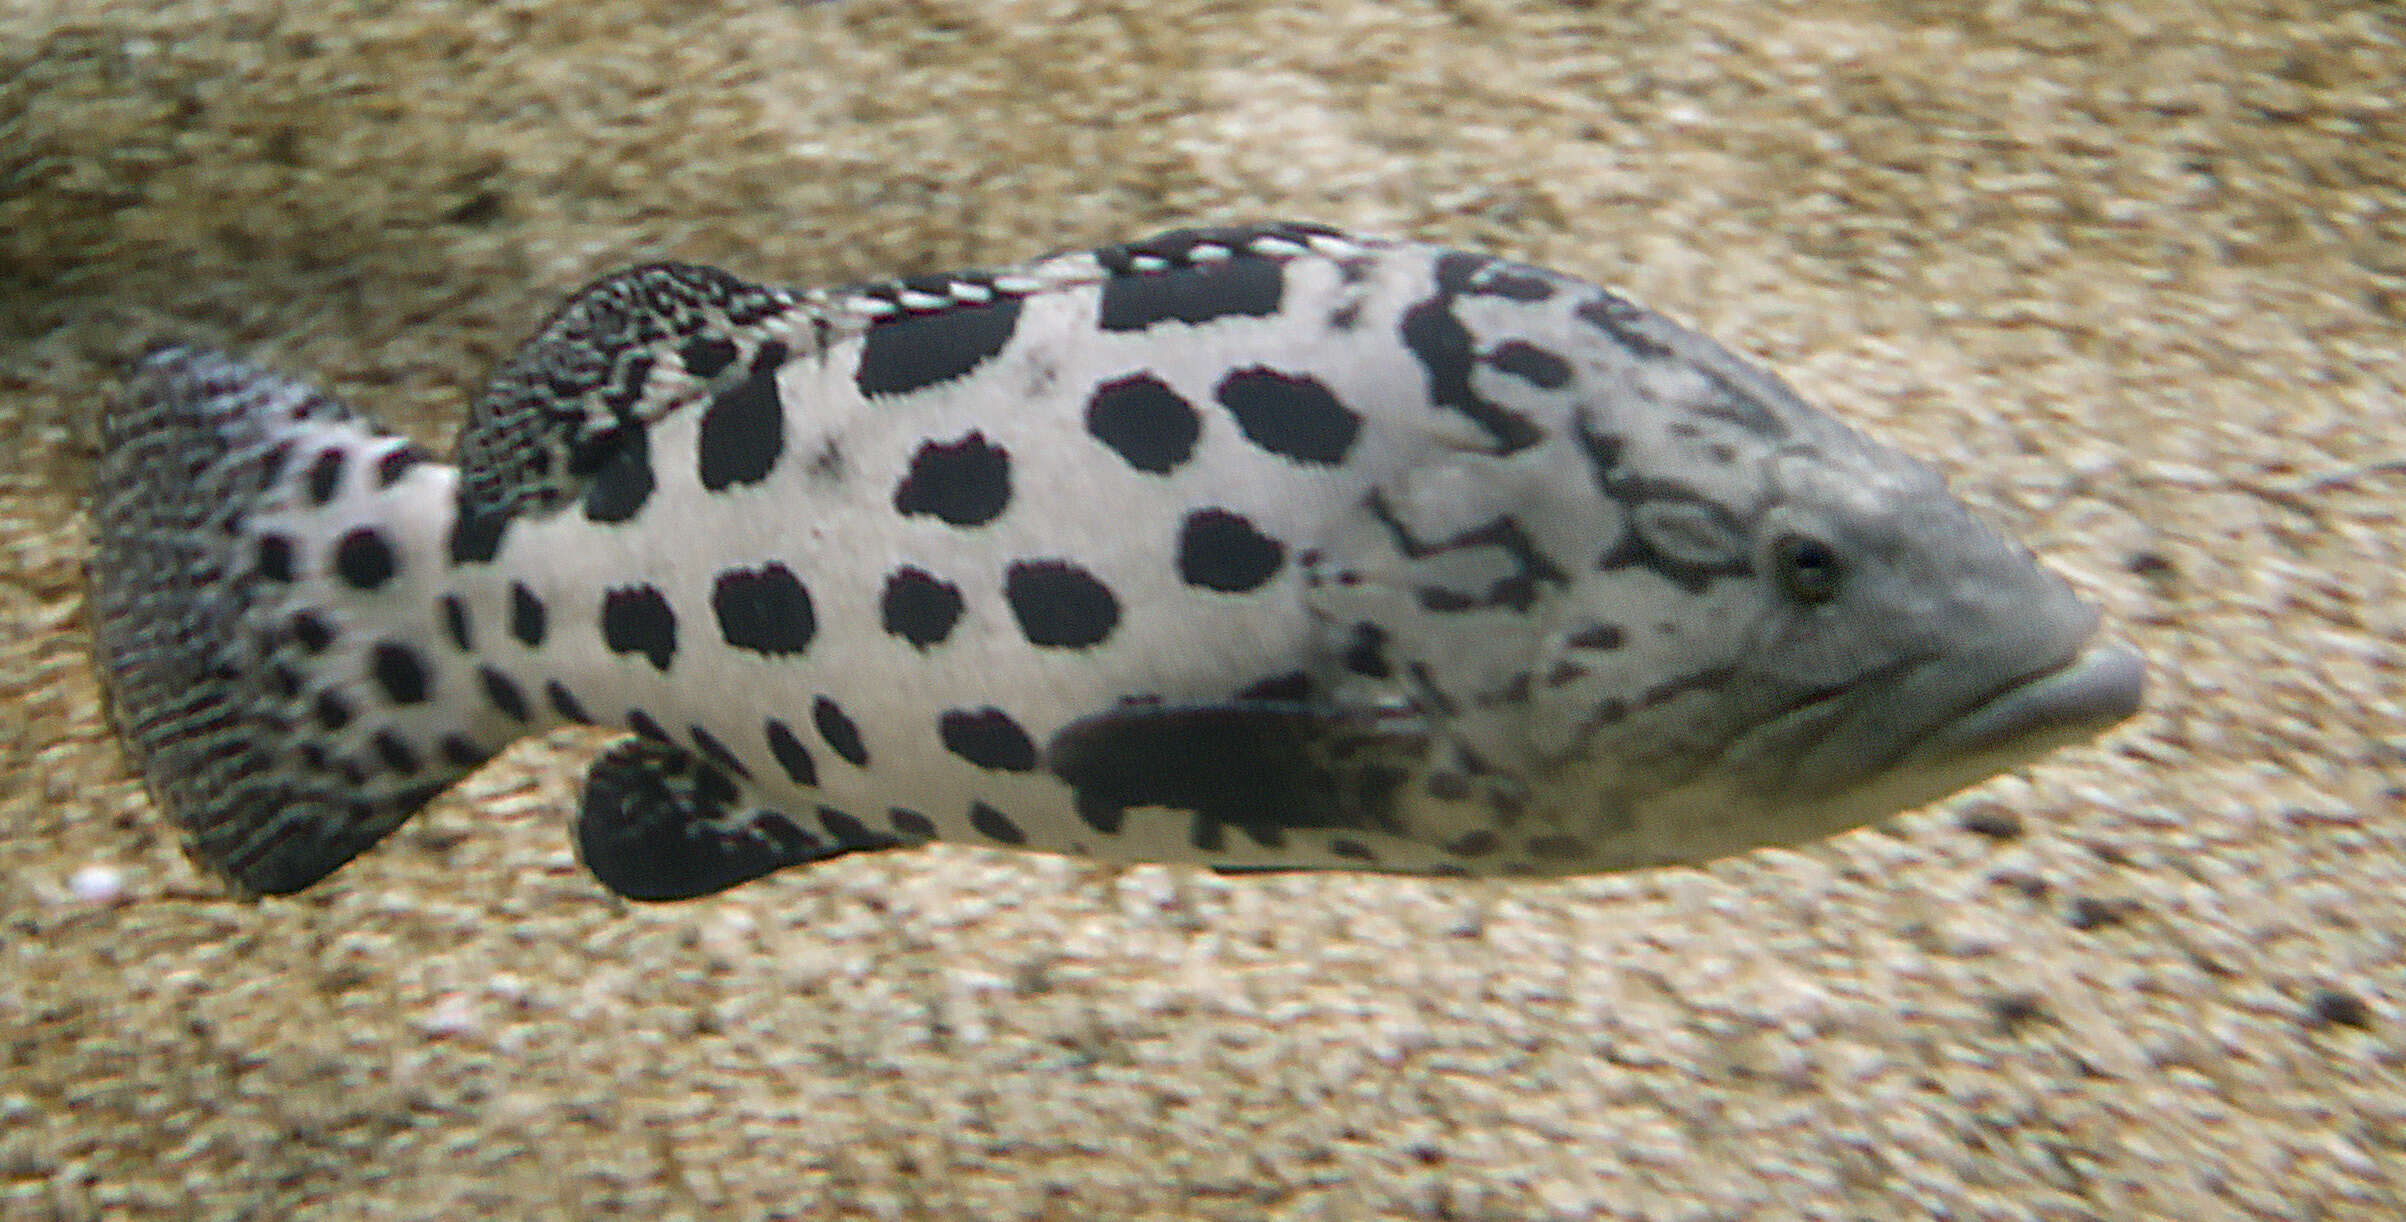 Image of Grouper